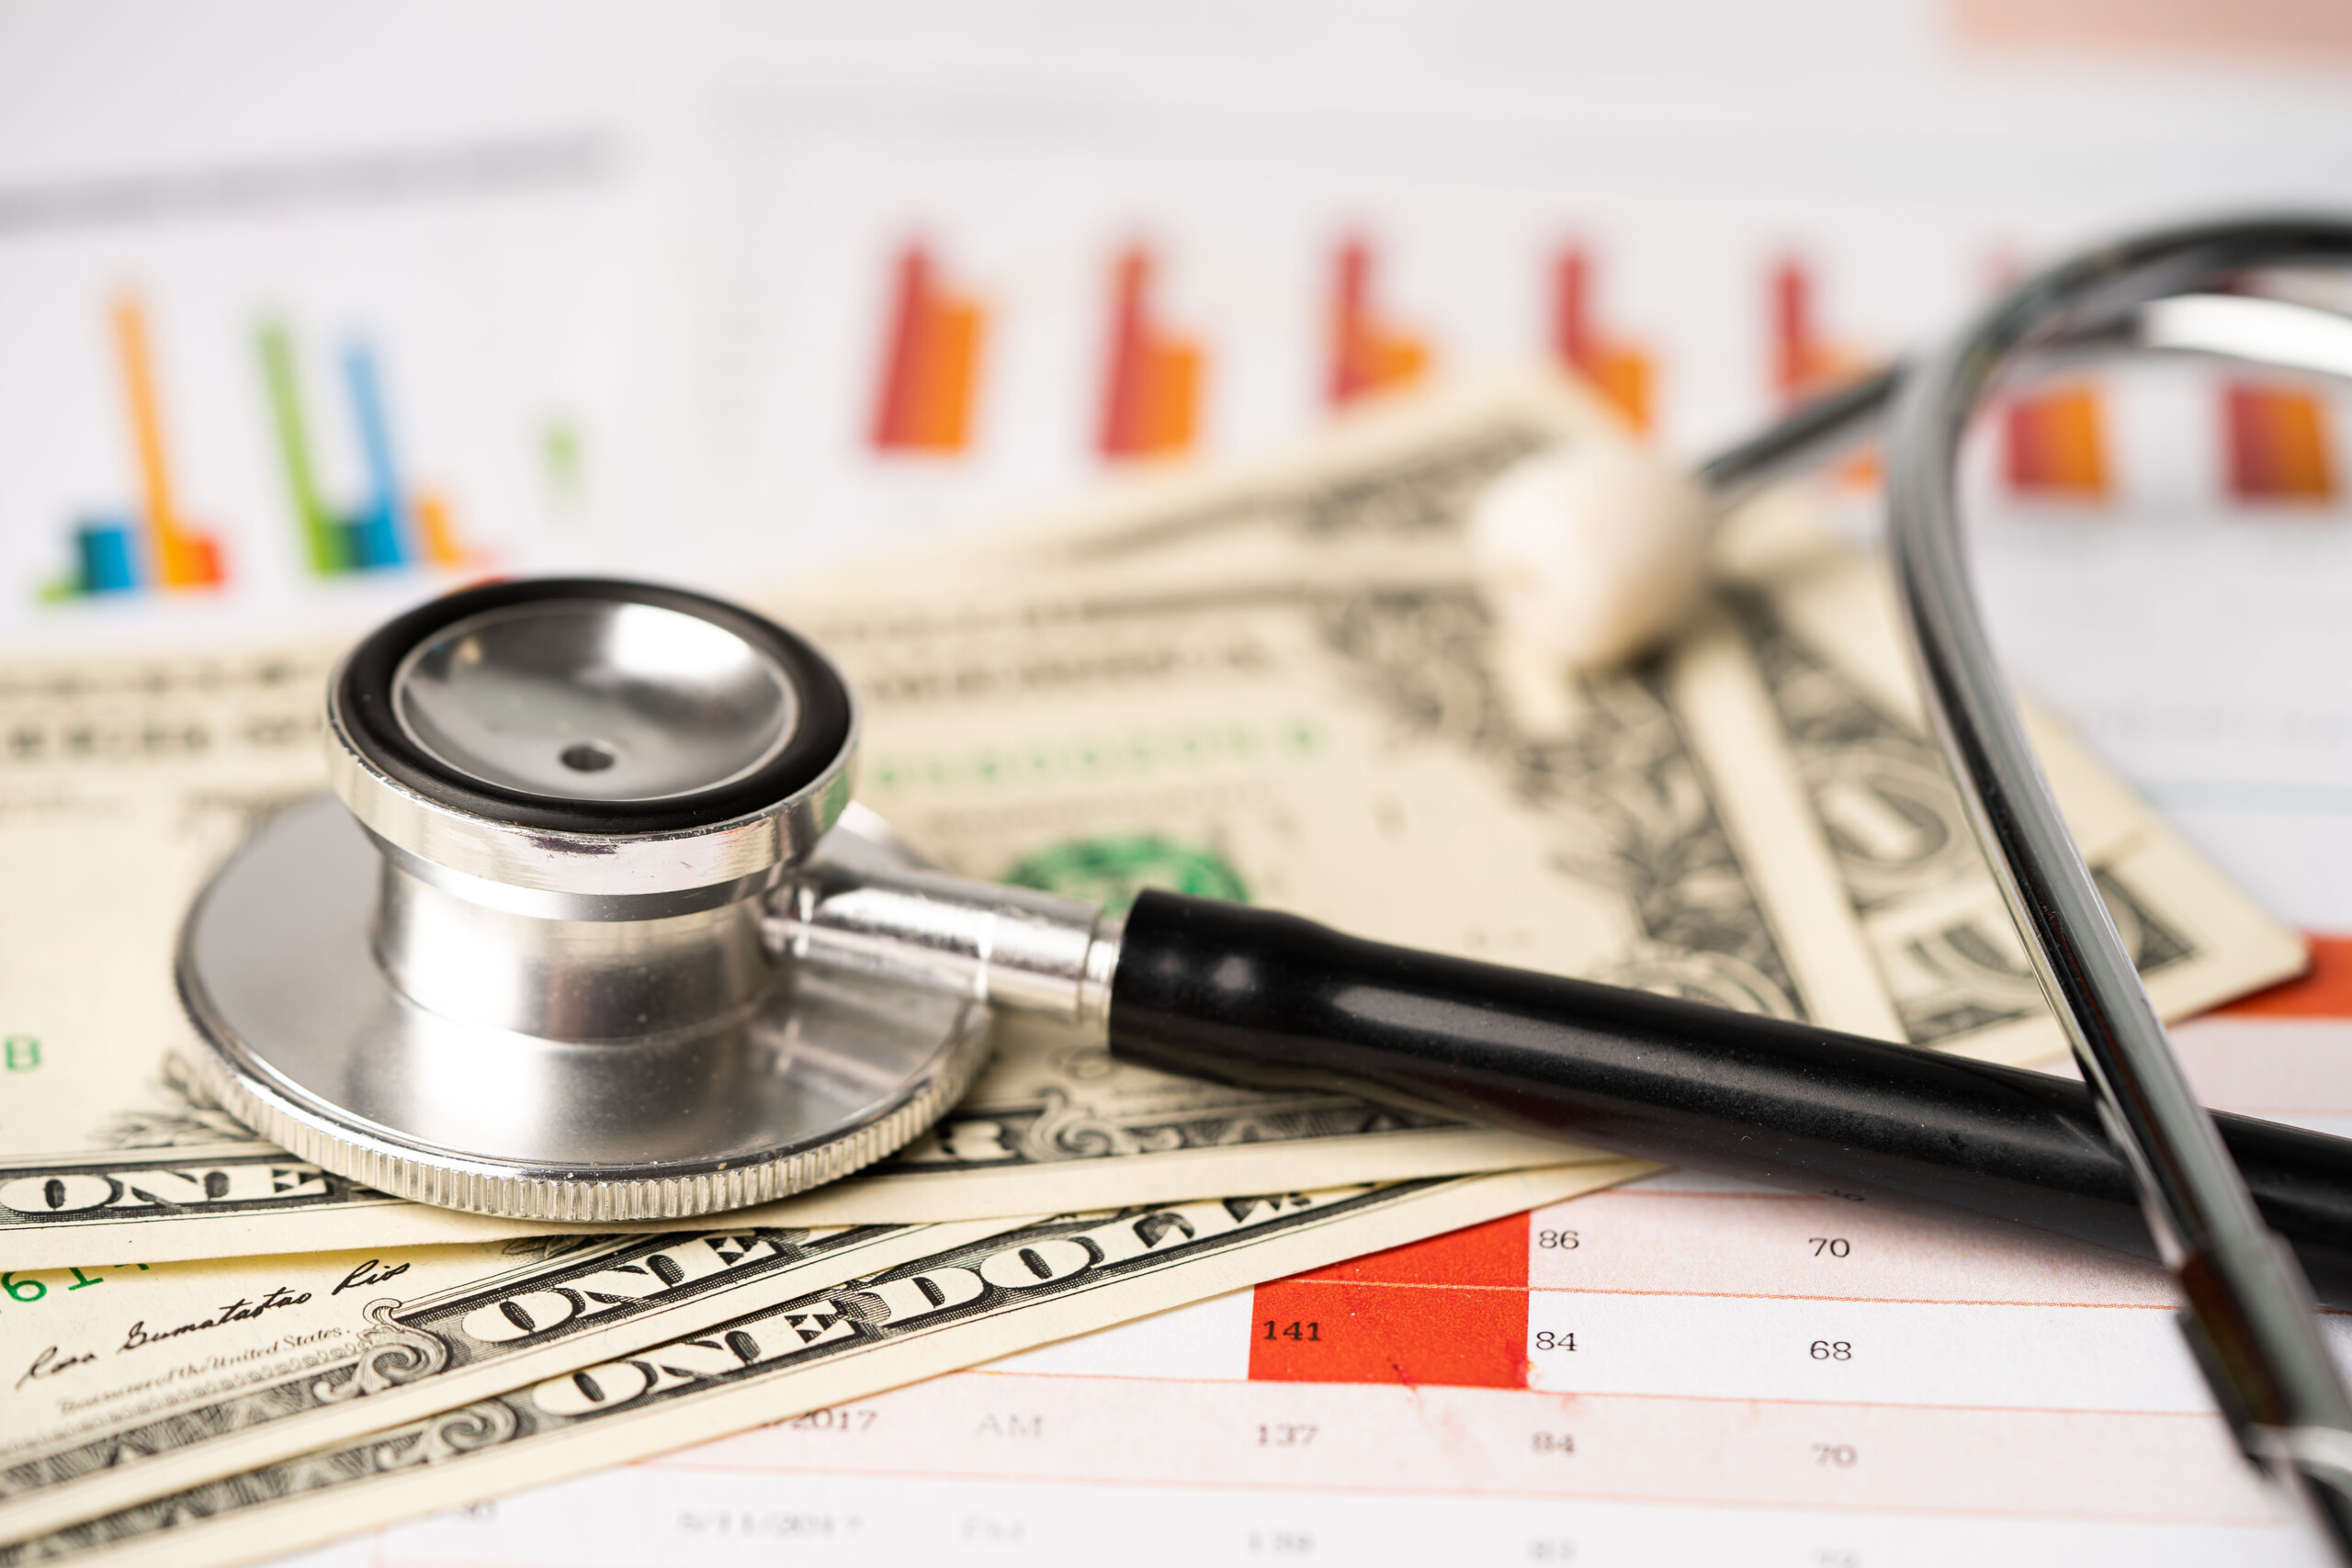 california-becomes-latest-state-to-try-capping-health-care-spending-–-kff-health-news